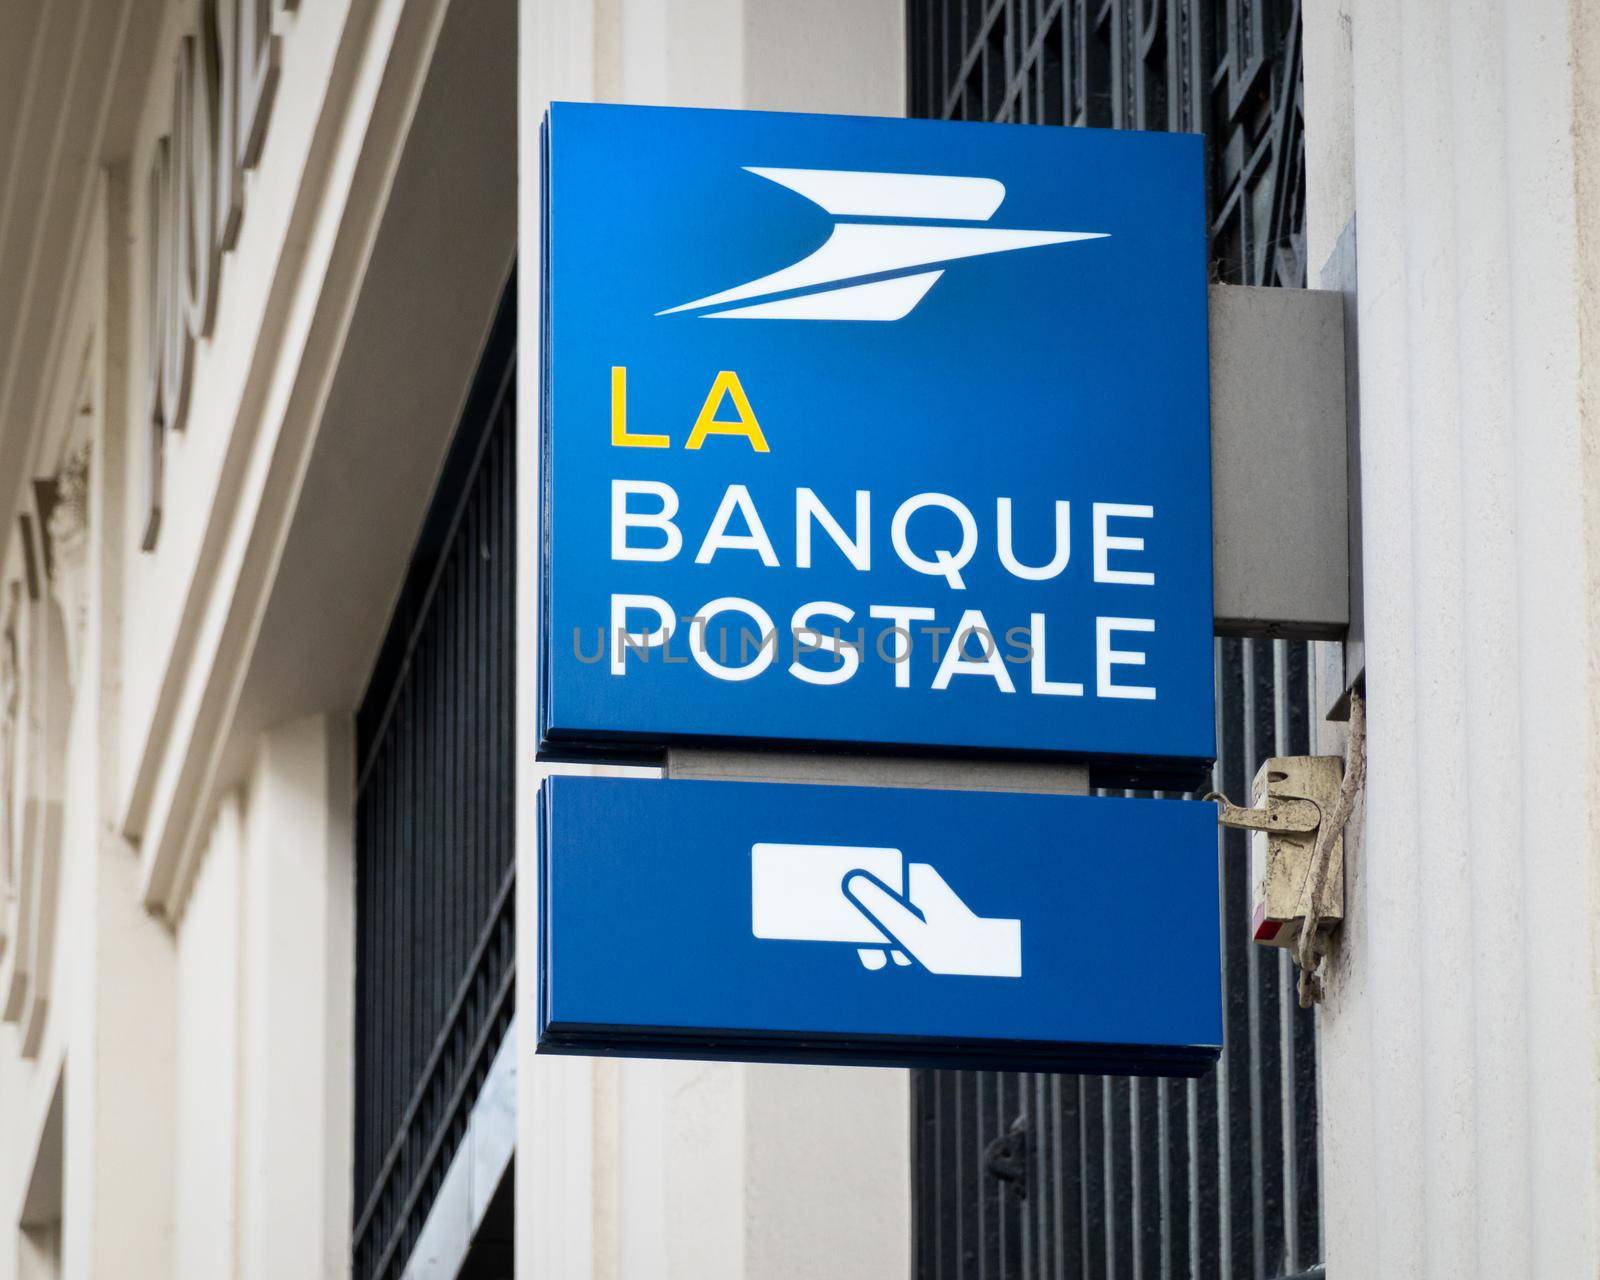 BAYONNE, FRANCE - CIRCA JFEBRUARY 2021: La Banque Postale sign. La Banque Postale is a French bank created on 1 January 2006.